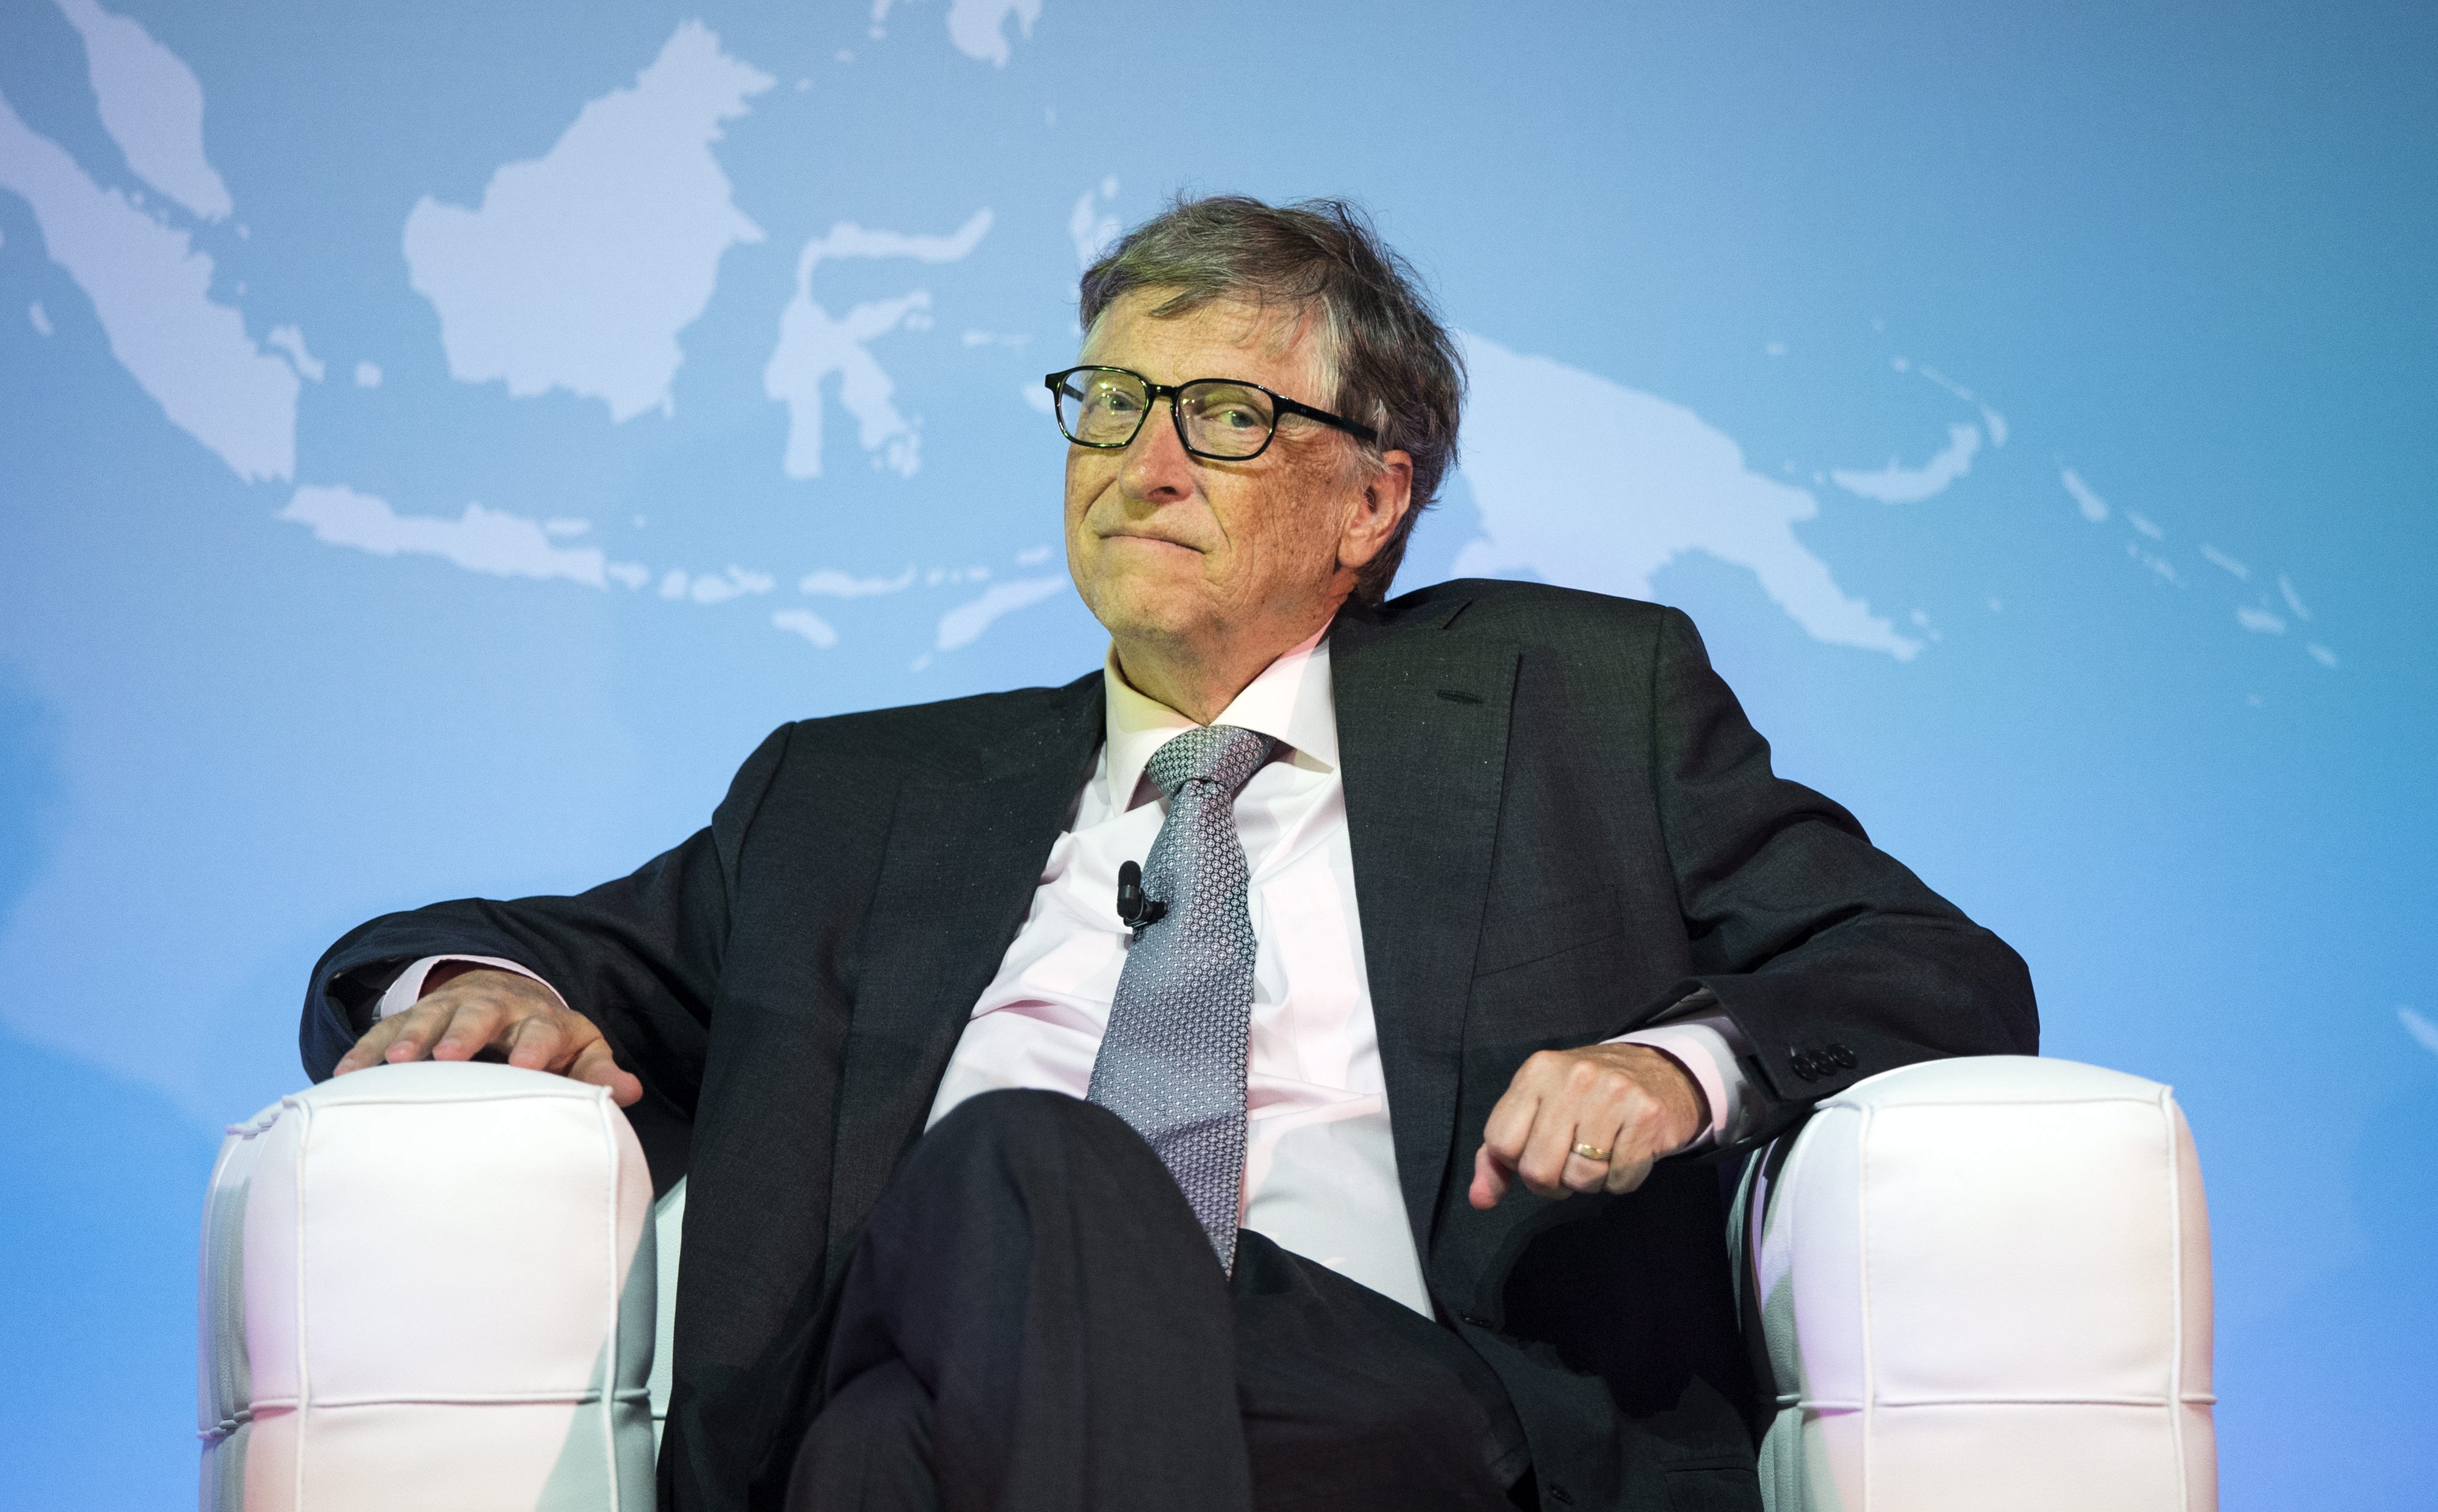 2016-10-26 13:16:35 epa05604063 US businessman Bill Gates smiles during an event called 'Leadership in science and innovation - good for Britain, good for the world' at the Methodist Hall in London, Britain, 26 October 2016. The discussion was attended by Bill Gates, Sir Richard Branson and the Secretary of State for International Development, Priti Patel. EPA/FACUNDO ARRIZABALAGA